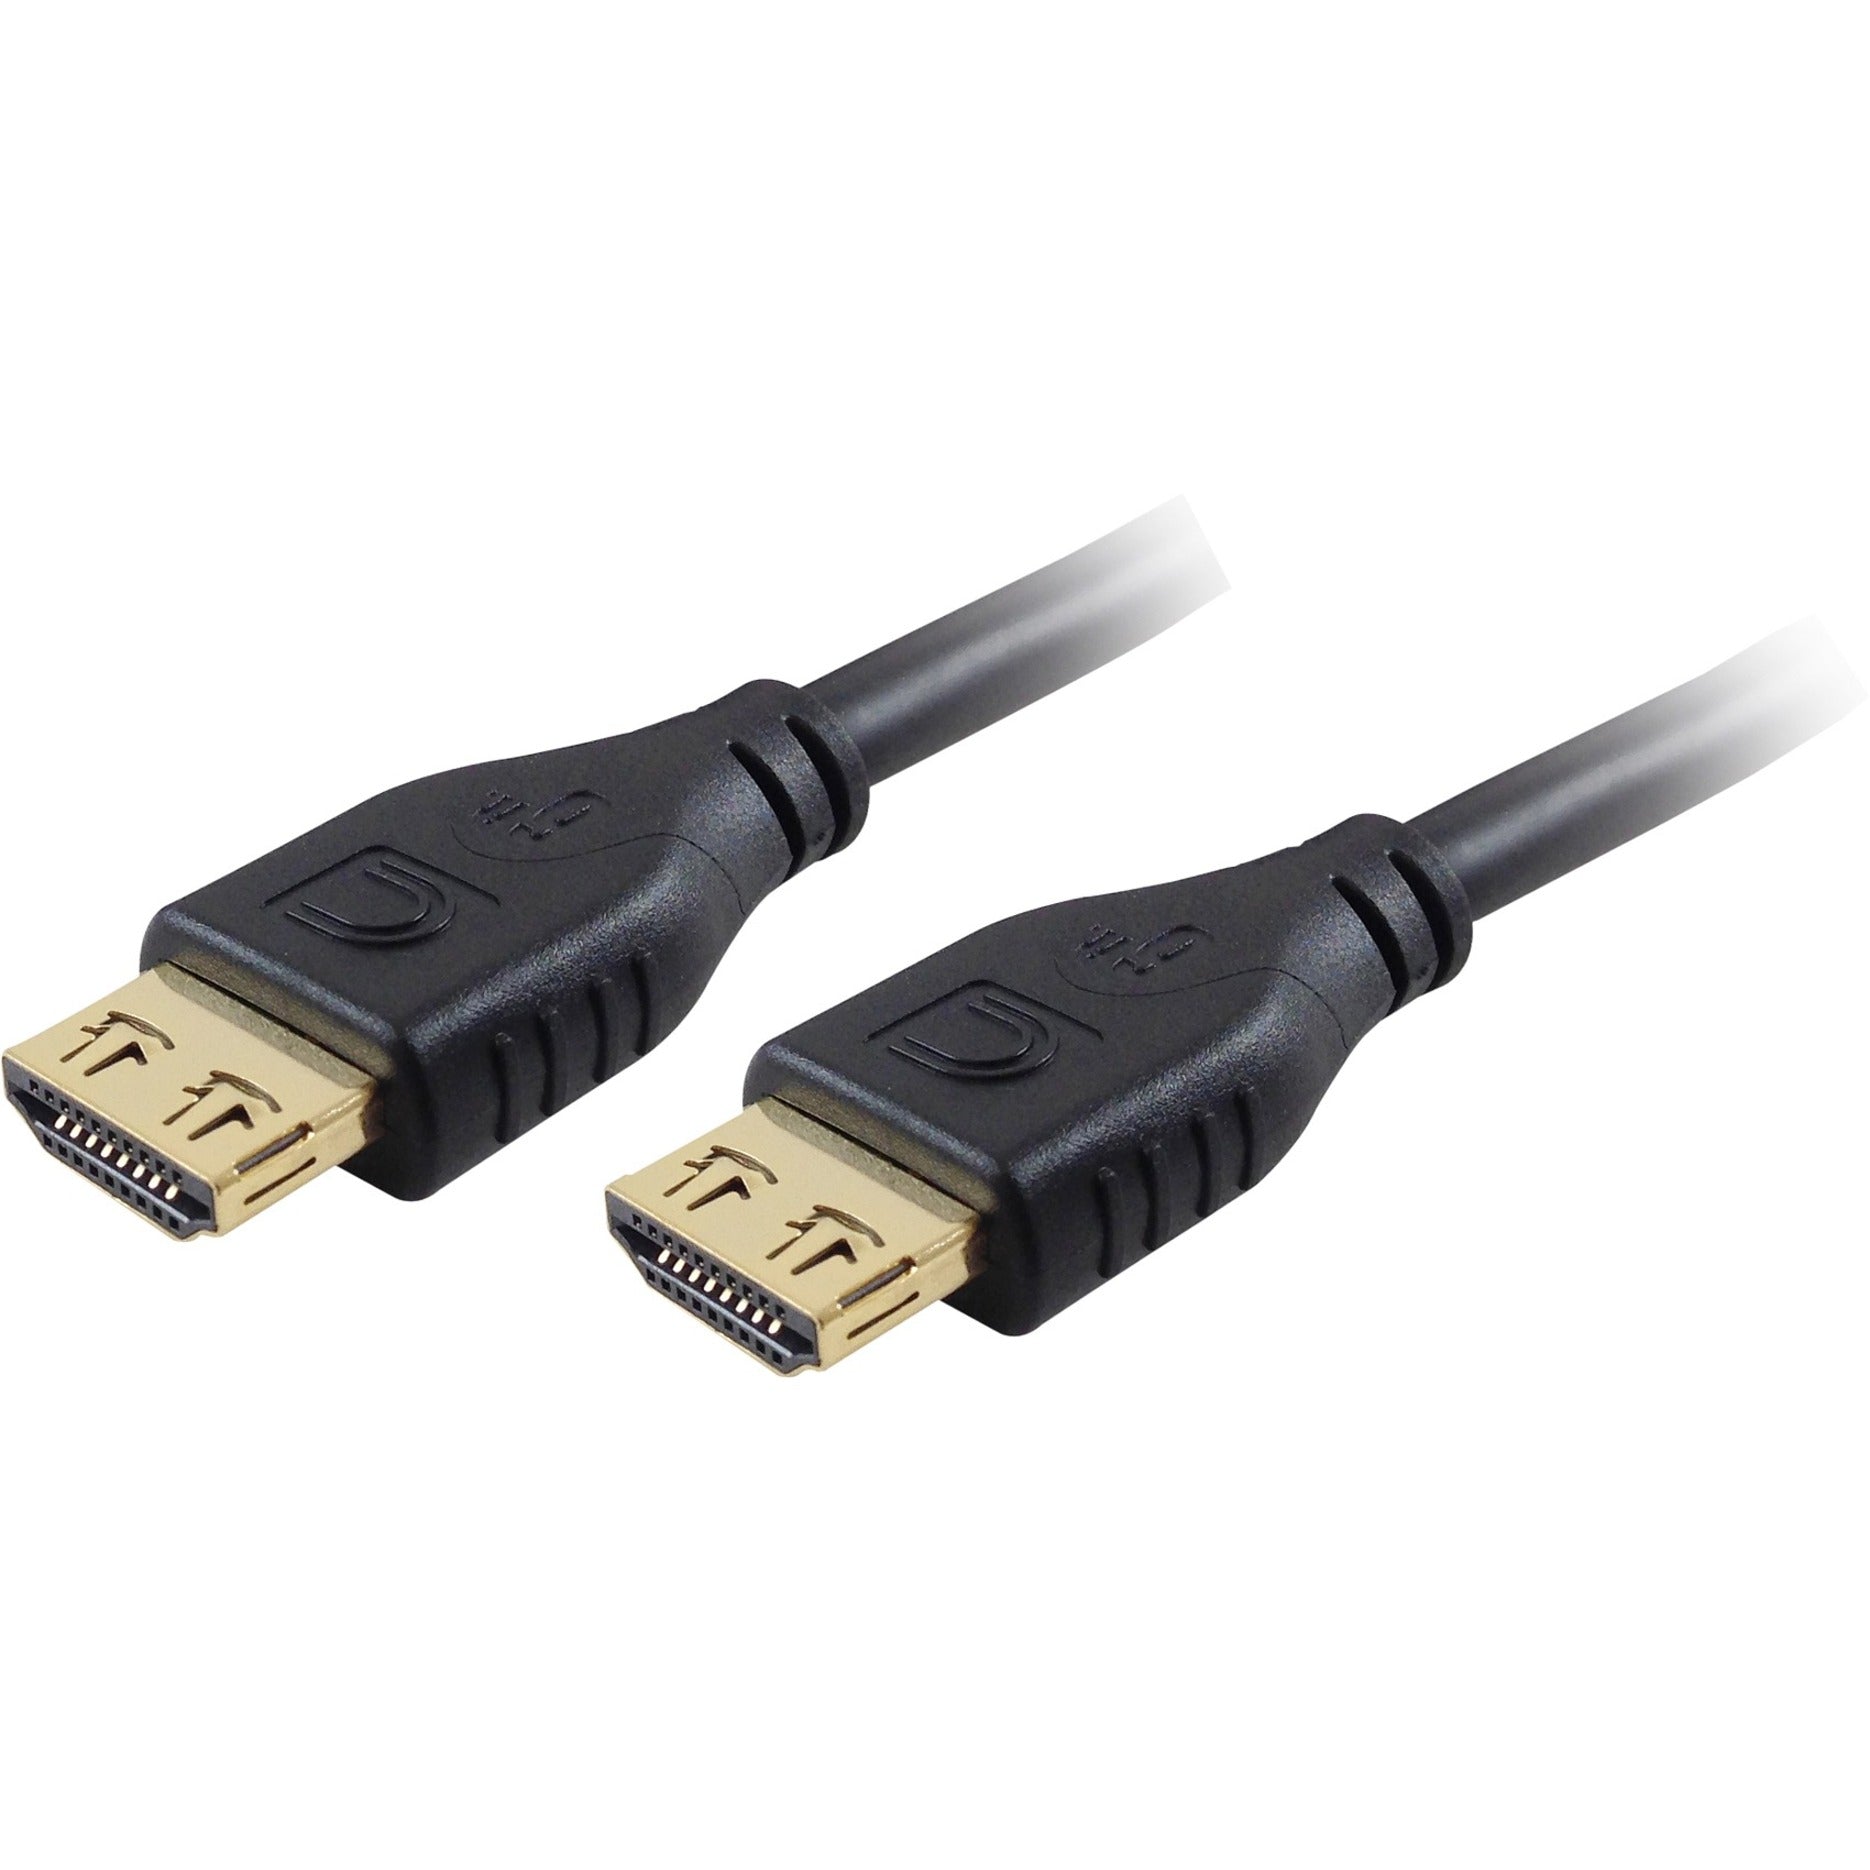 Comprehensive MHD-MHD-12PROBLK MicroFlex Pro AV/IT Series HDMI Cable, 12ft, Ultra Flexible, Gold Plated Connectors, Jet Black